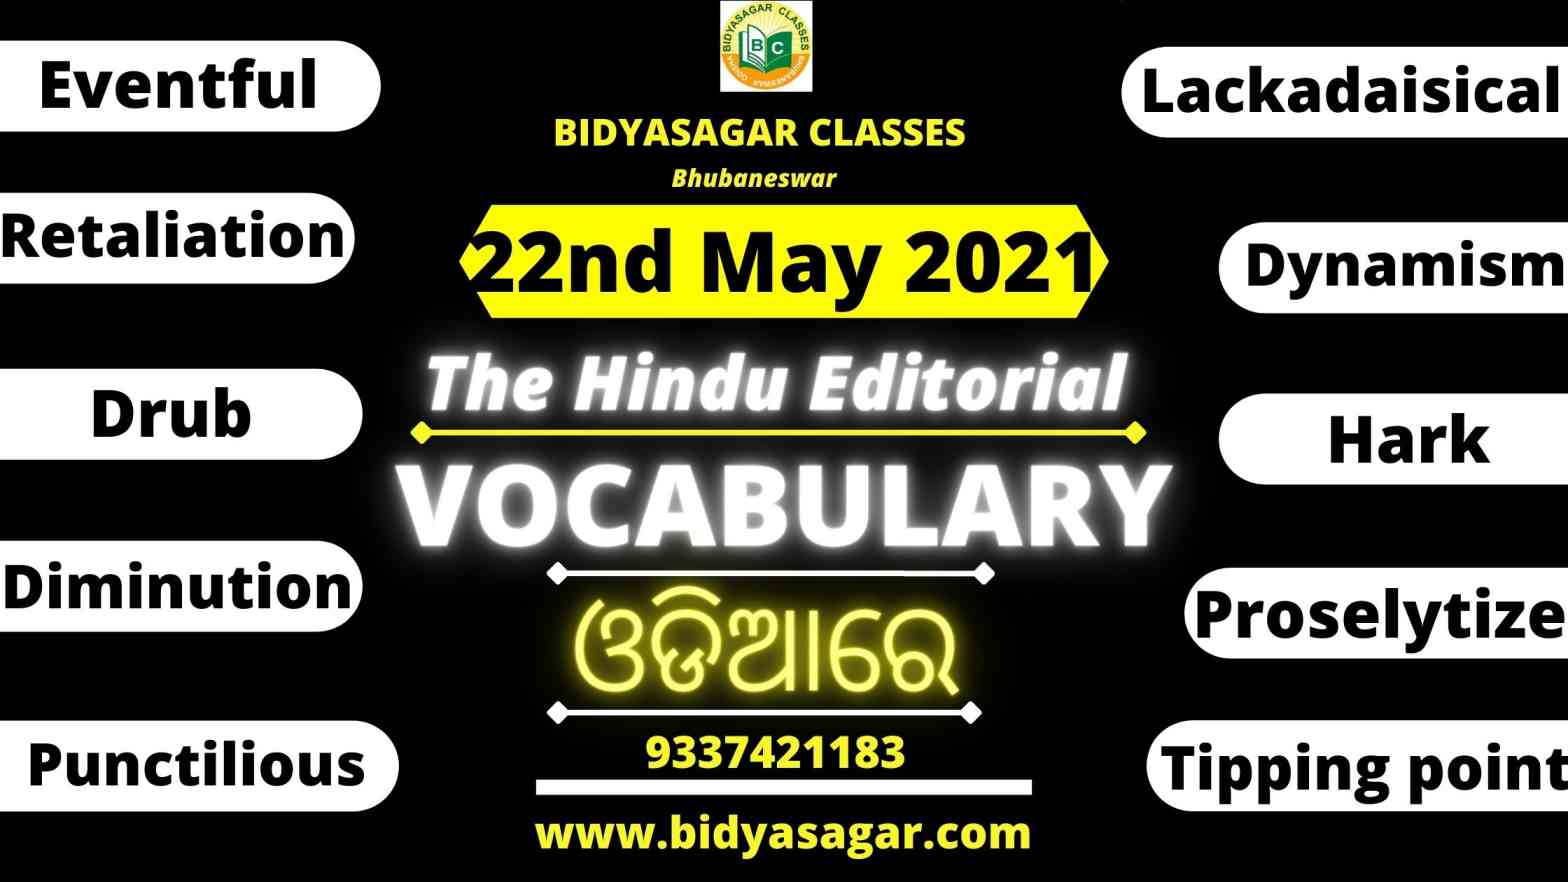 The Hindu Editorial Vocabulary of 22nd May 2021